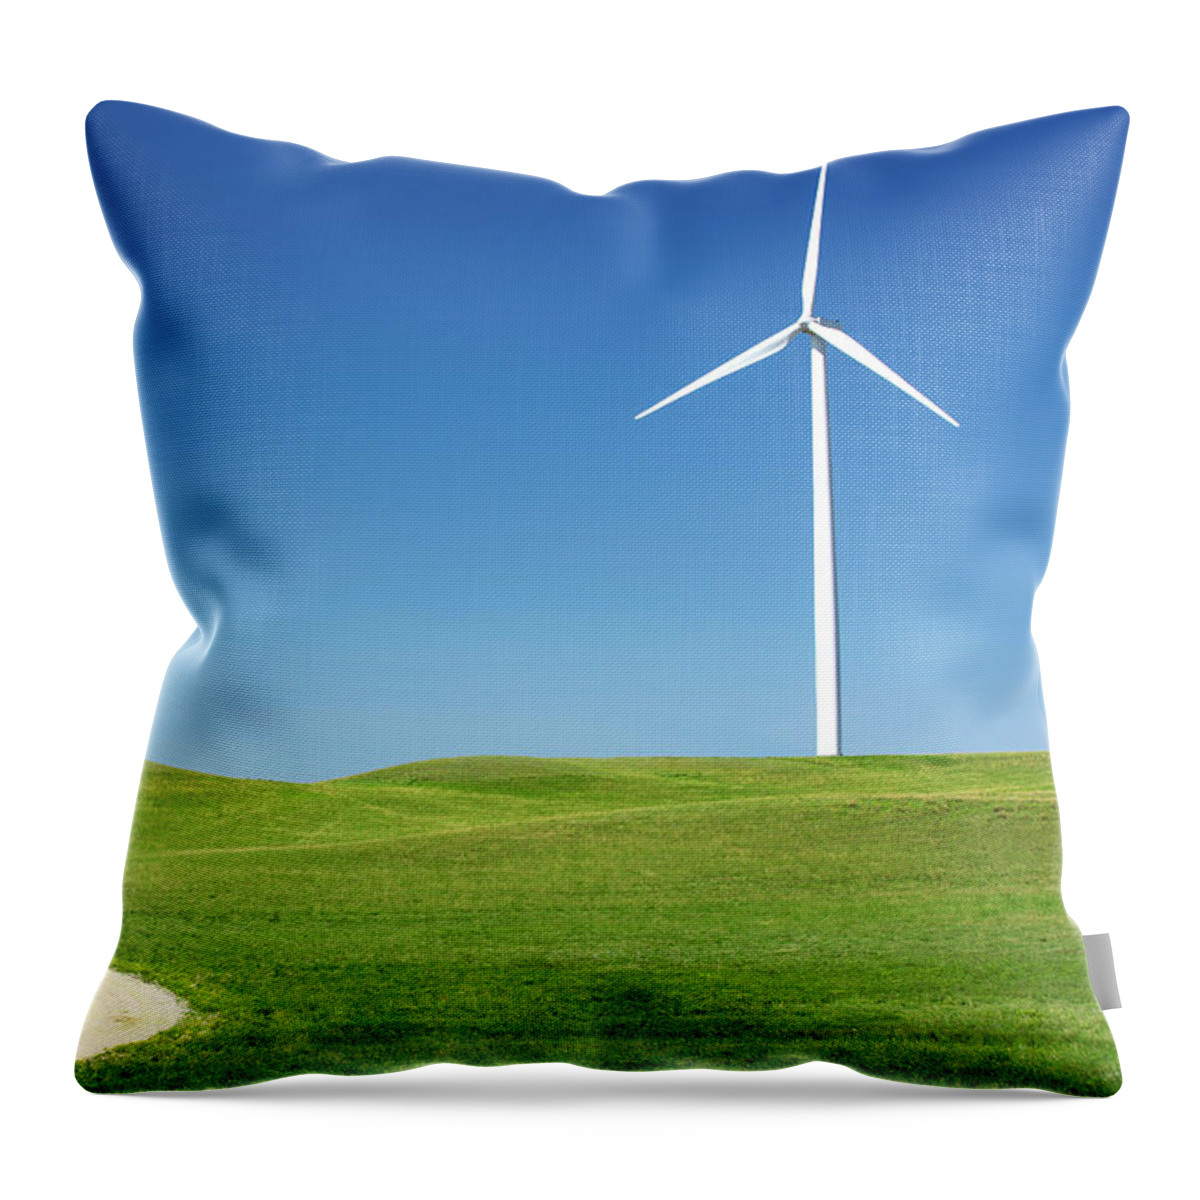 Wind Turbine Throw Pillow featuring the photograph Trail Turbine by Todd Klassy